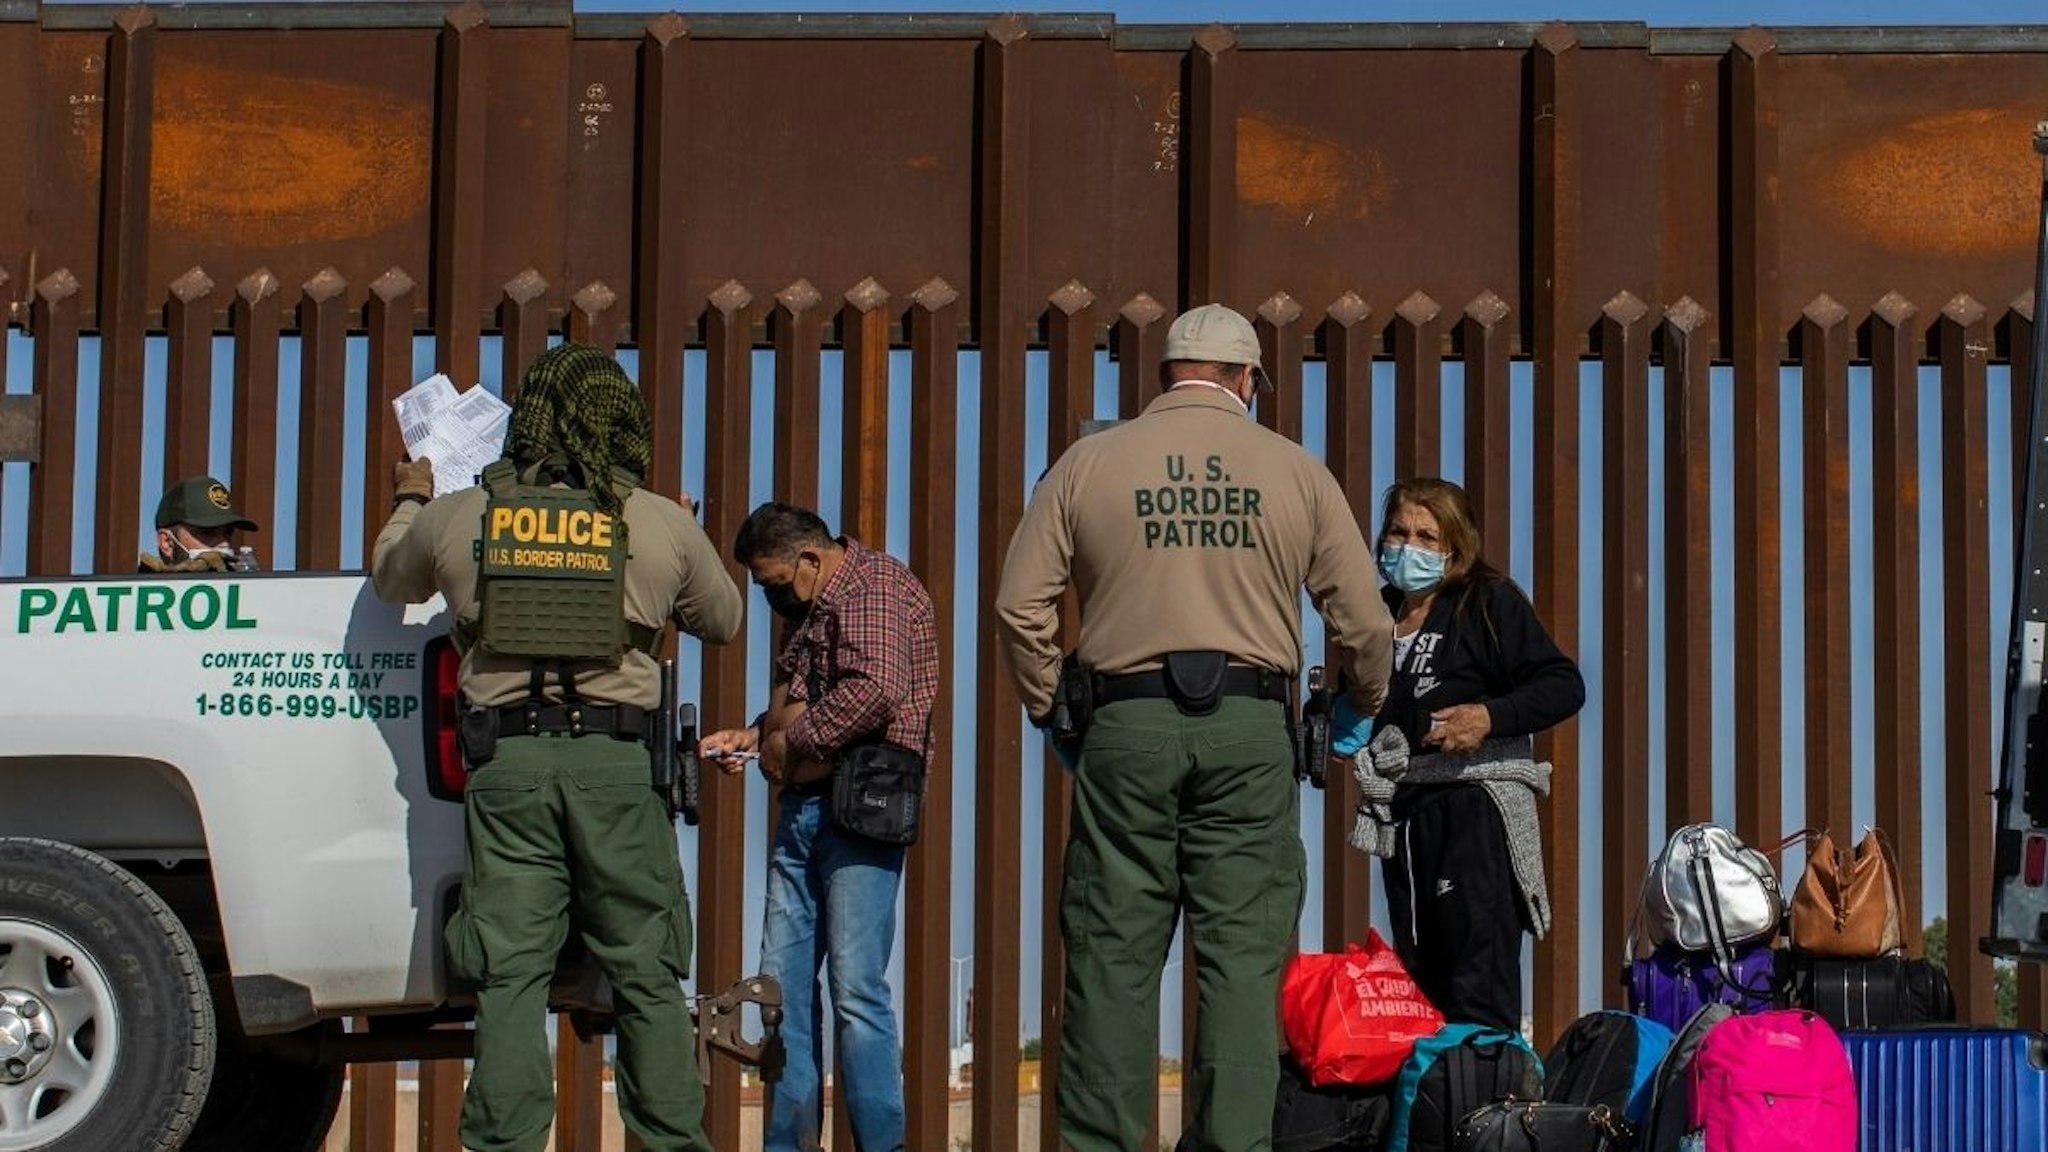 An asylum seeker from Colombia injects insulin after he turned himself in to US Border Patrol agents on May 13, 2021 in Yuma, Arizona.